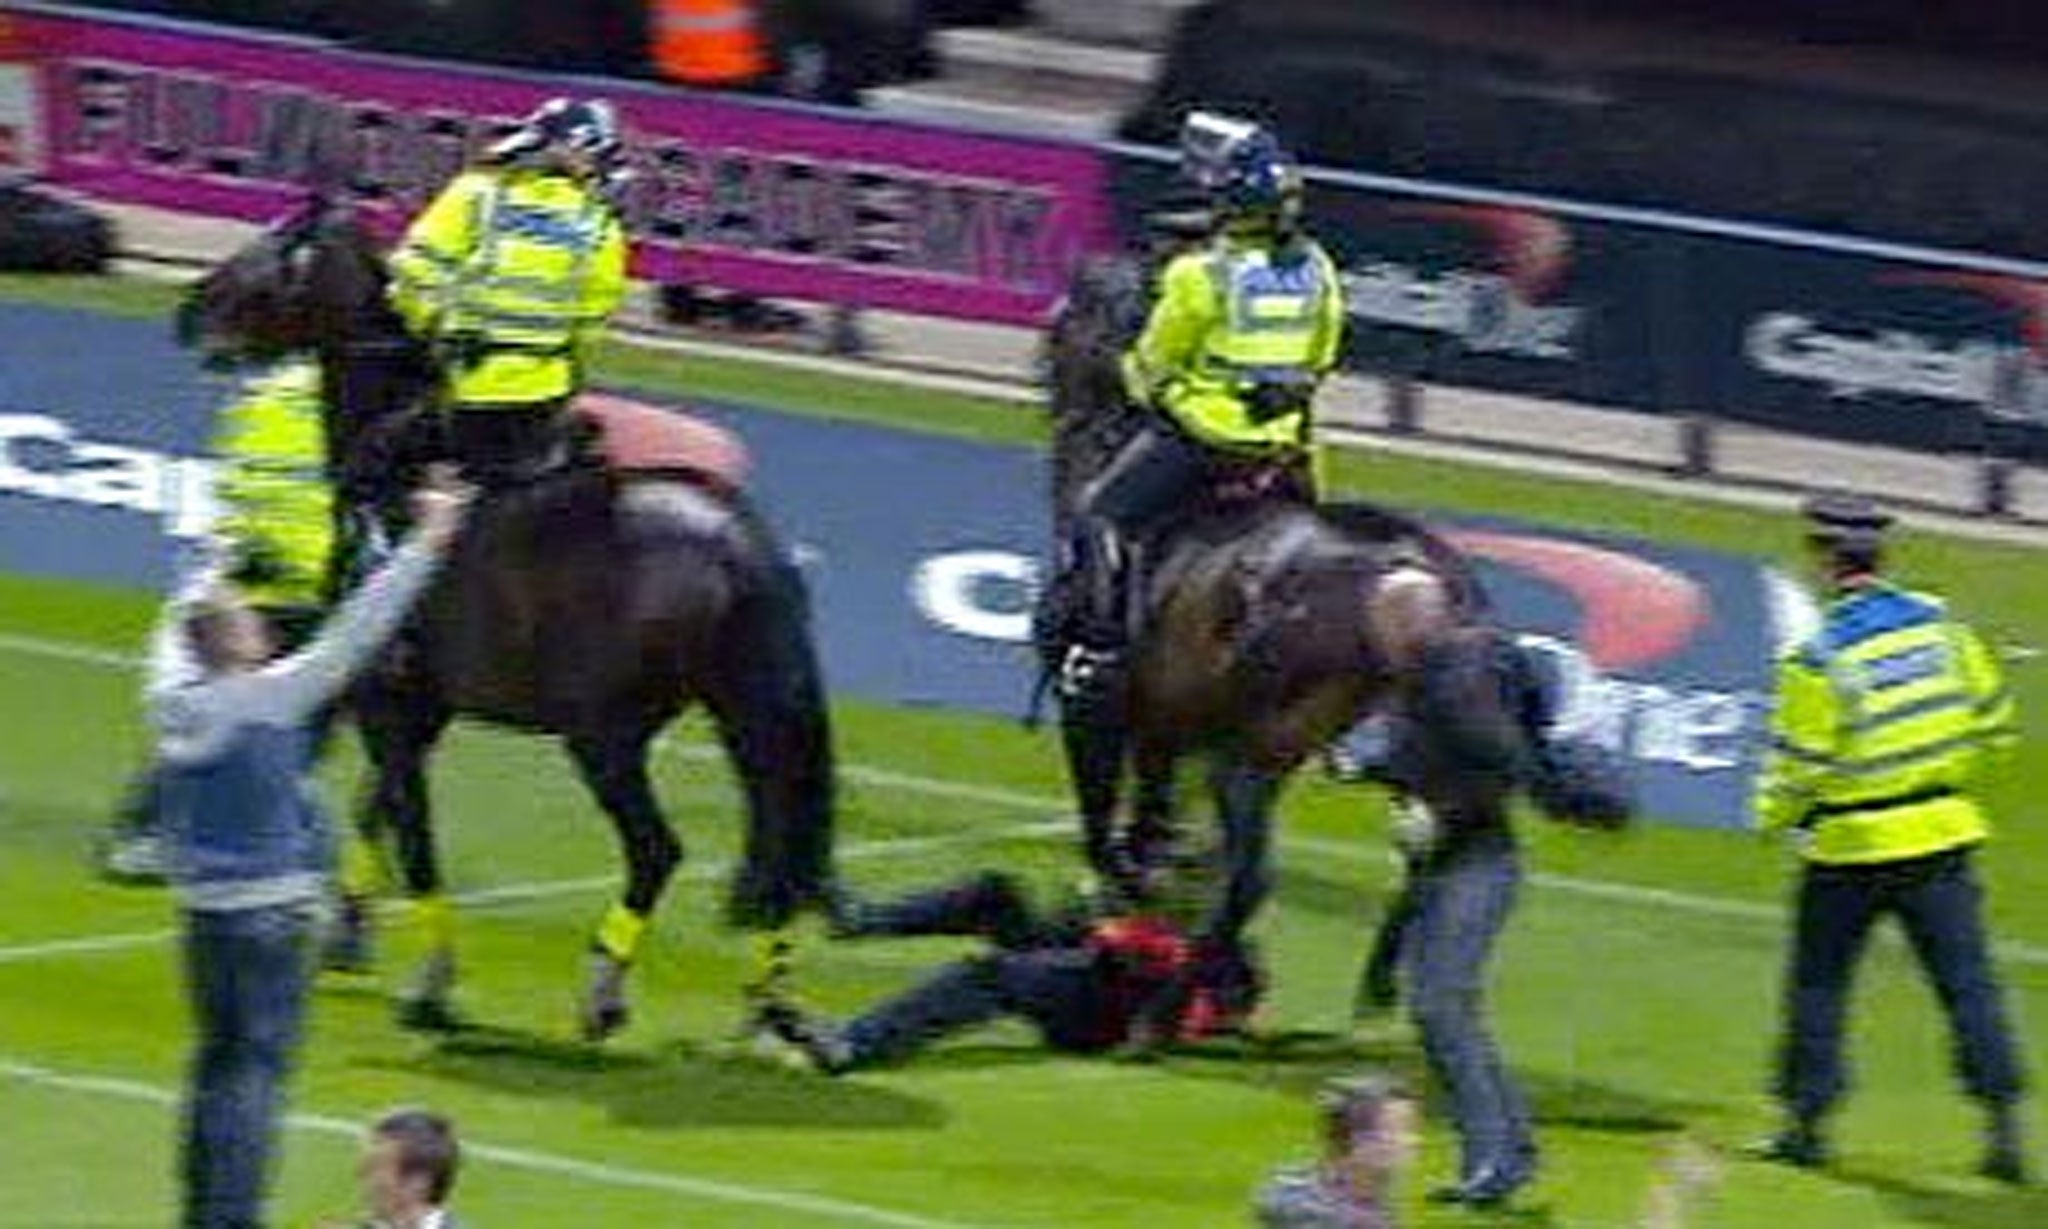 A steward required hospital treatment after being trampled by a police horse during a pitch invasion at a match involving Preston North End and Blackpool.